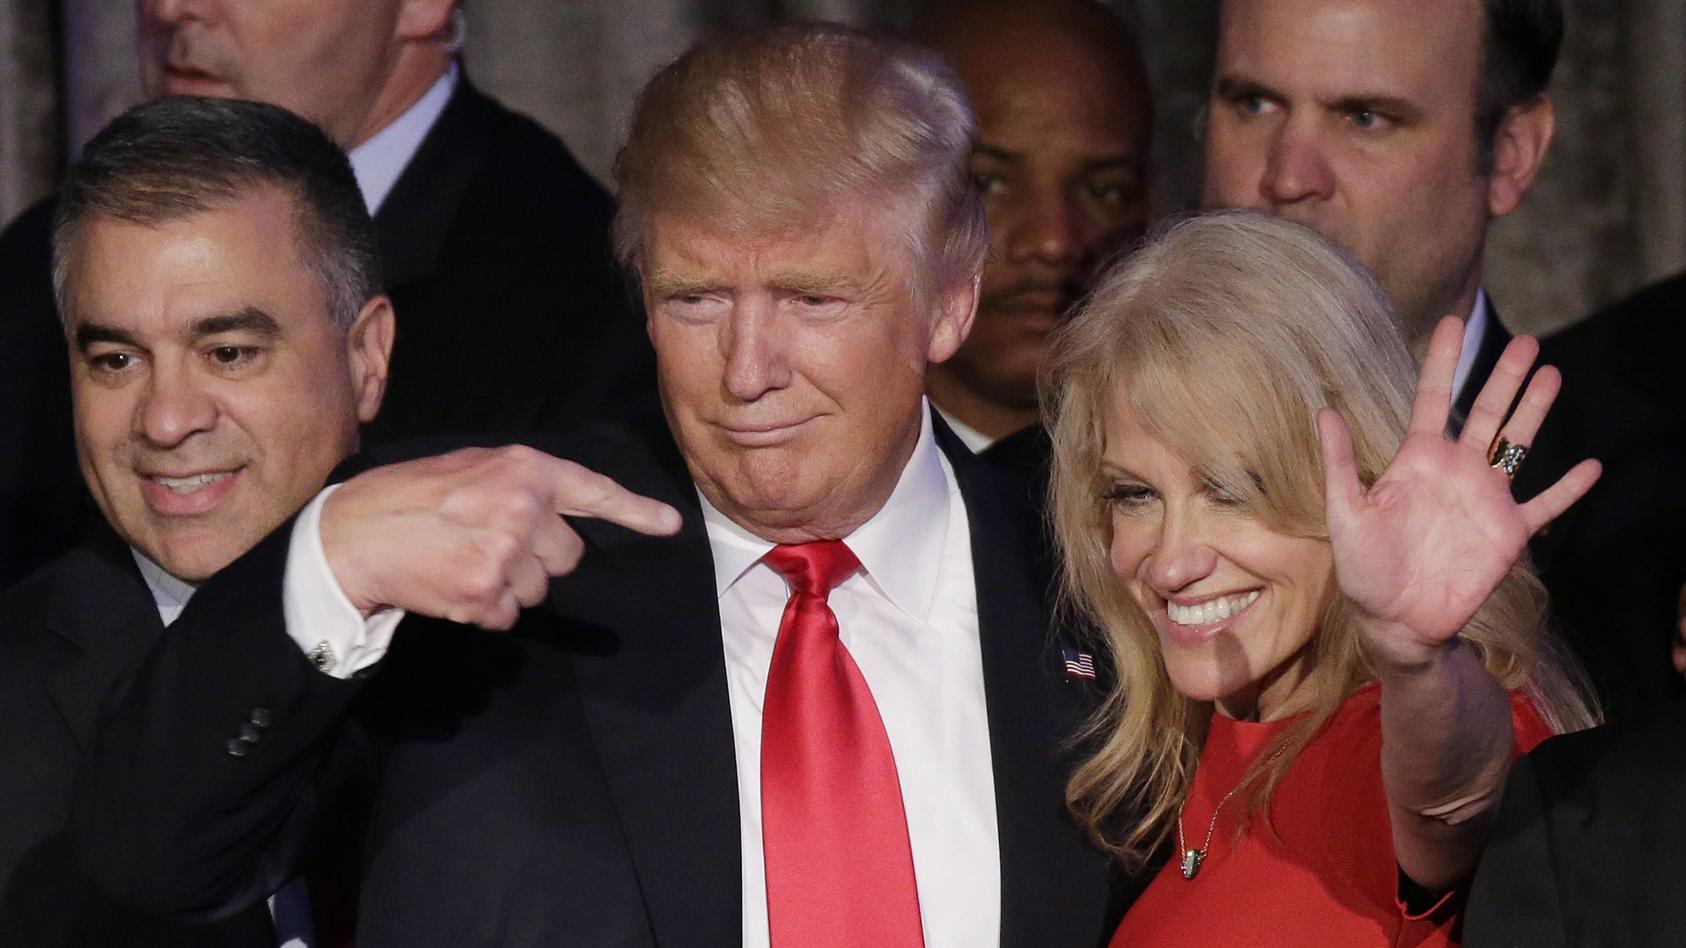  USA-Wahlen - Donald Trump tritt nach Wahlsieg vor seine Anhänger President-elect of the United States Donald Trump points to campaign manager Kellyanne Conway after making his acceptance speech at the New York Hilton Midtown on November 8, 2016 in N